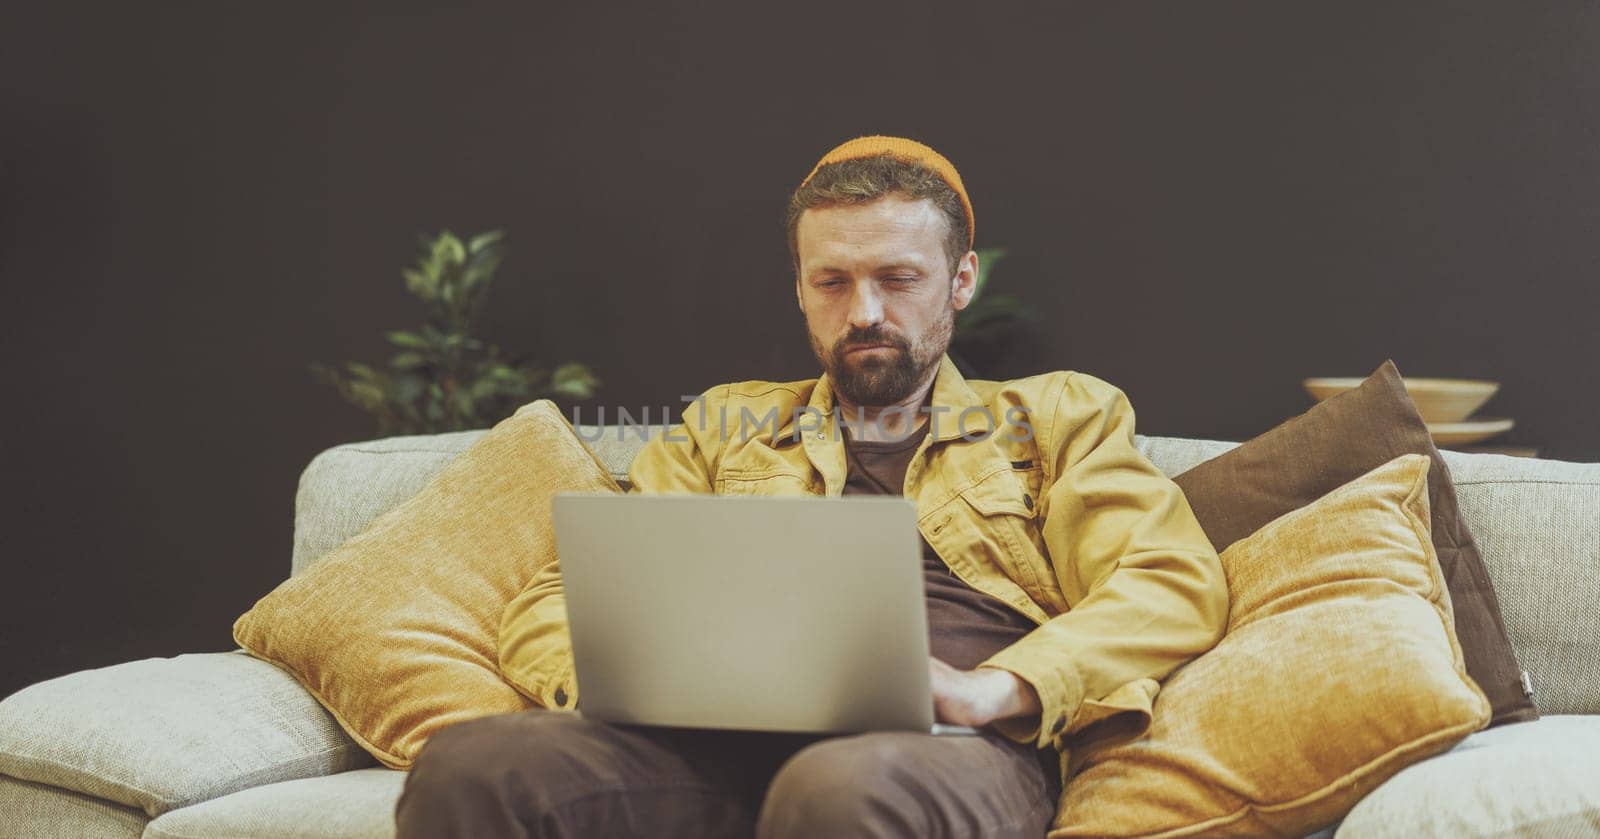 Man sitting on couch with a laptop, engaged in work or other digital activities. Relaxed and comfortable setting of couch suggests that man is in home office or cozy indoor environment. . High quality photo